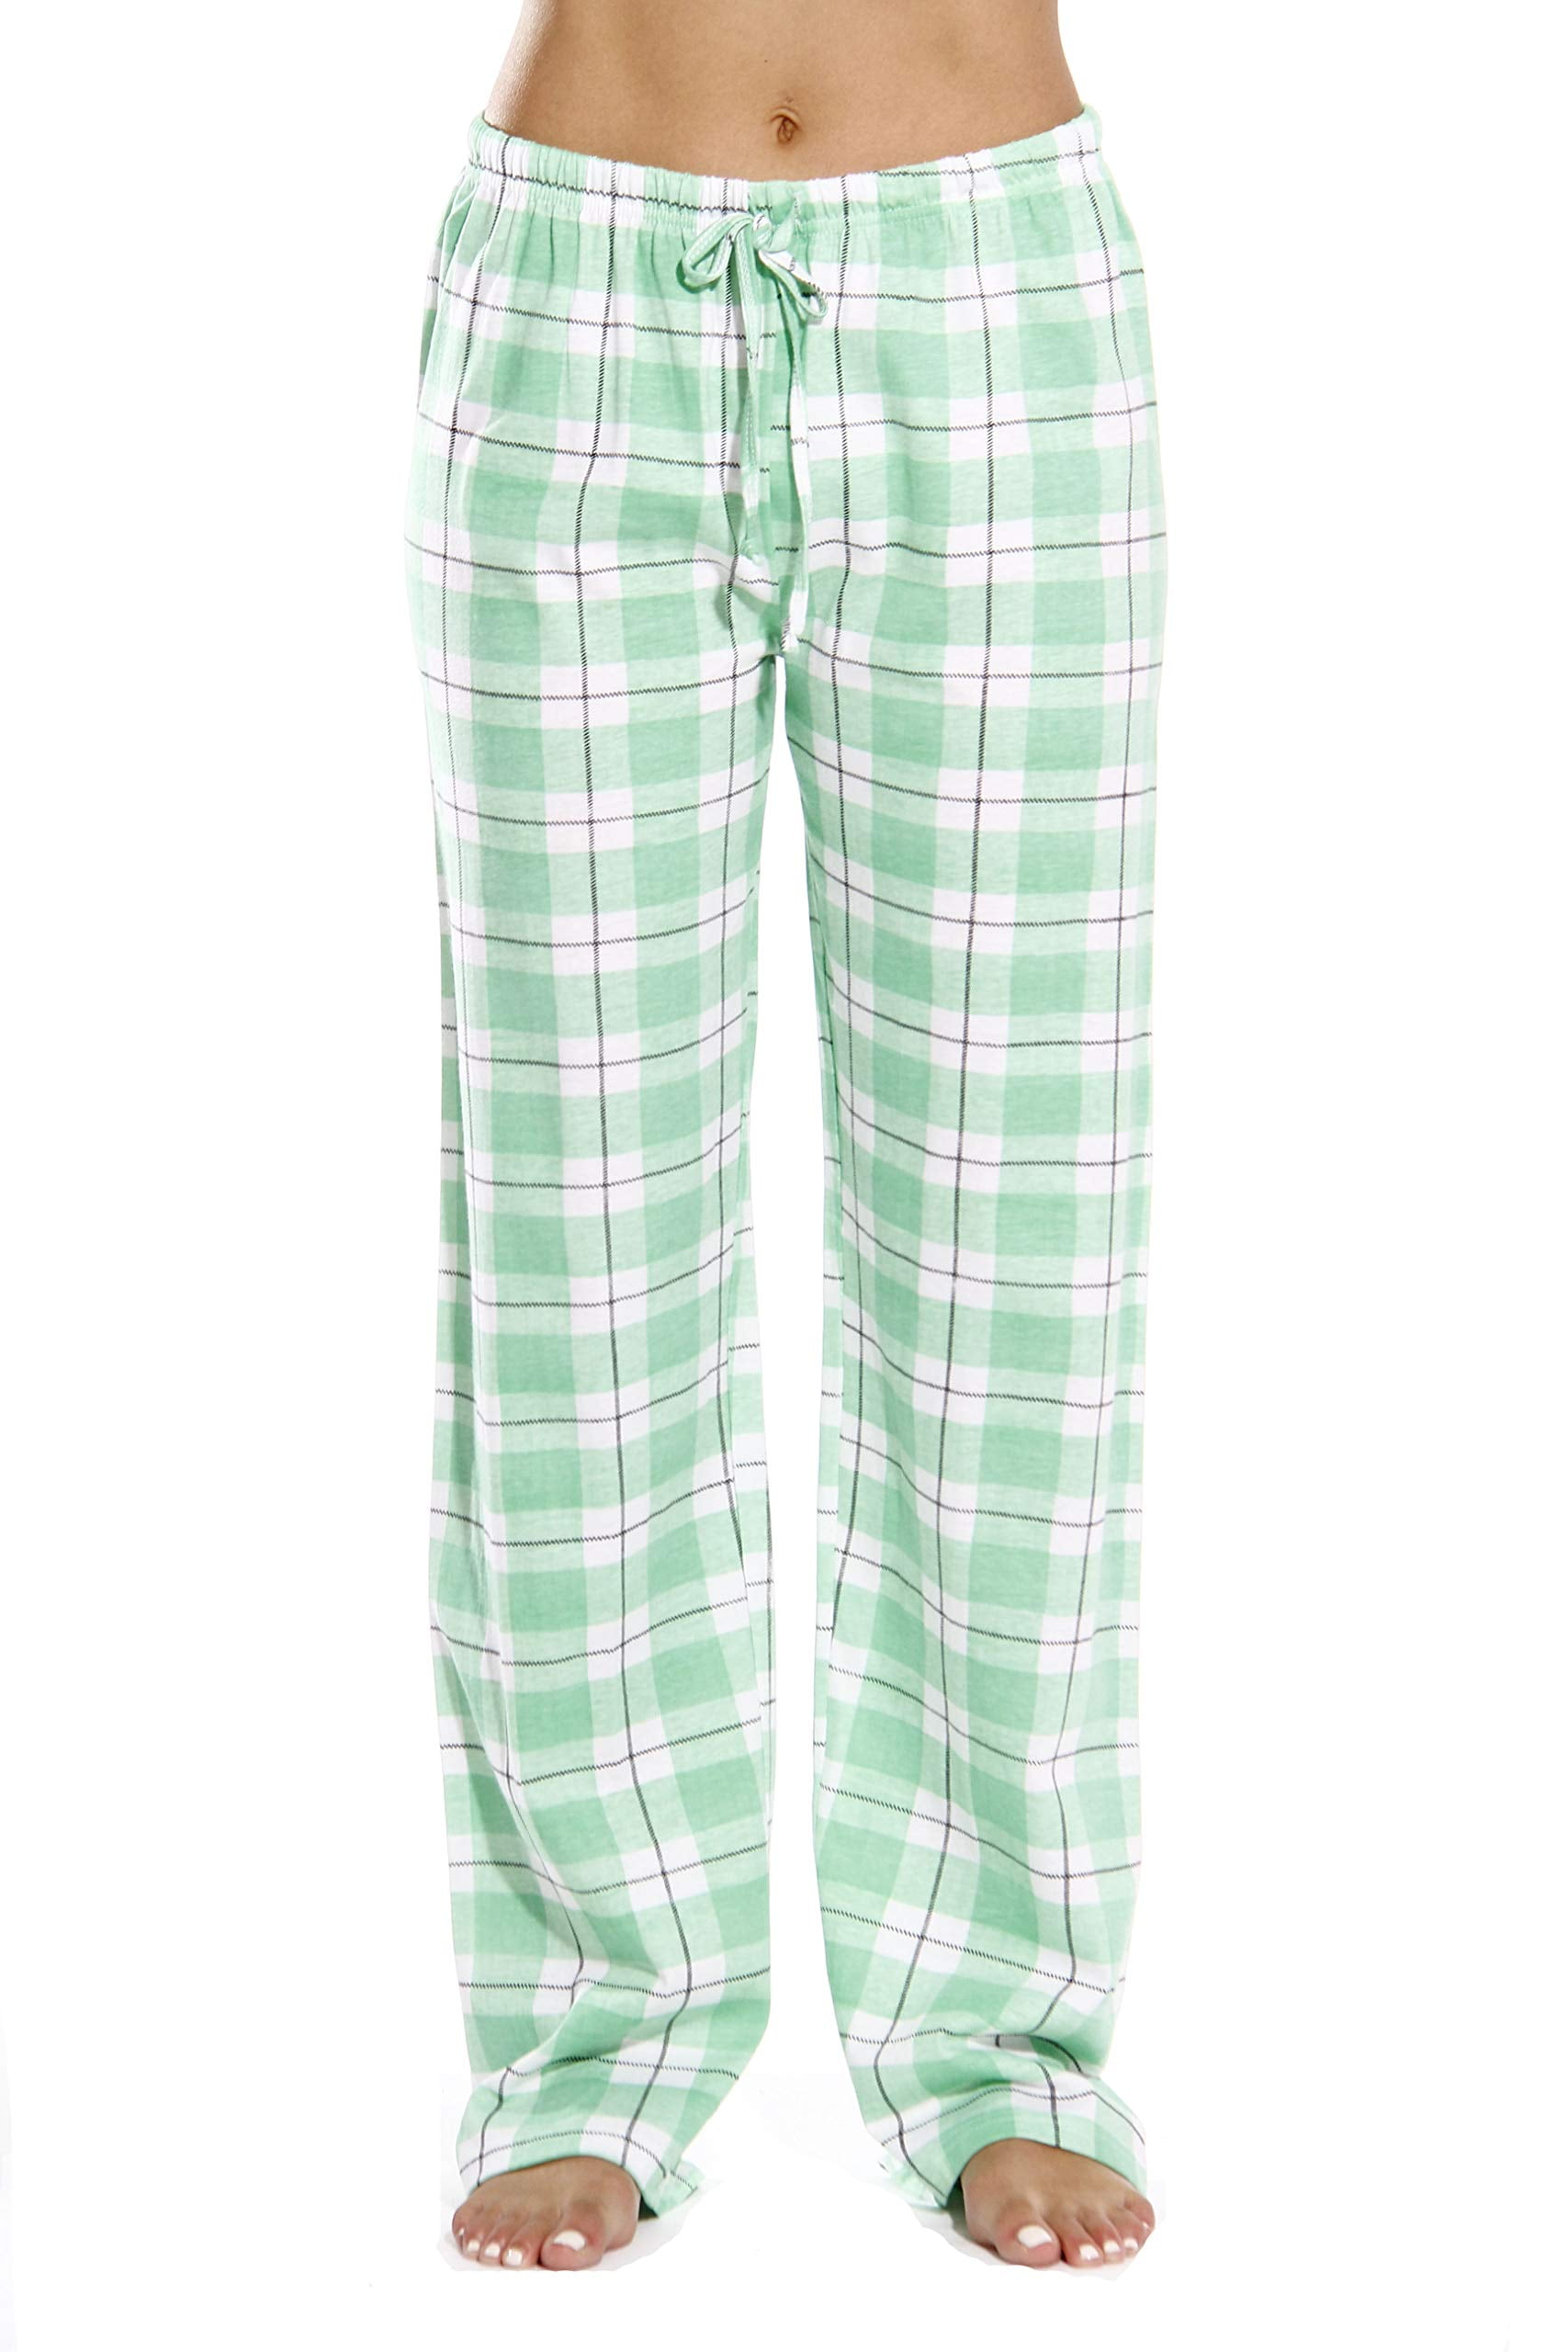 Just Love Women's Plaid Pajama Pants in 100% Cotton Jersey - Comfortable  Sleepwear for Women (Black - Plaid, Small) 